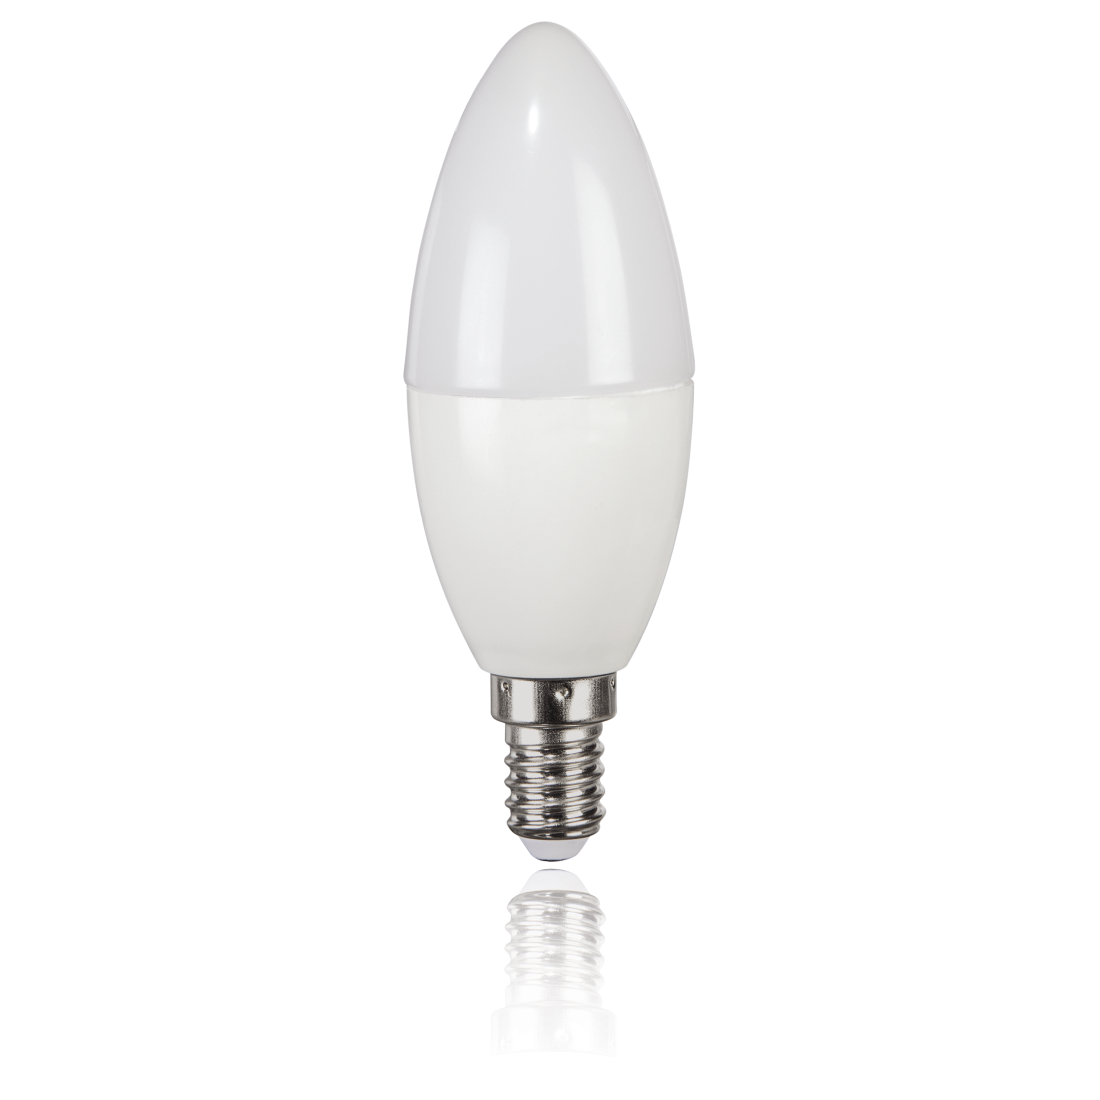 abx2 High-Res Image 2 - Xavax, LED Bulb, E14, 470 lm replaces 40W, Candle Bulb, warm white, 3-stage dim.